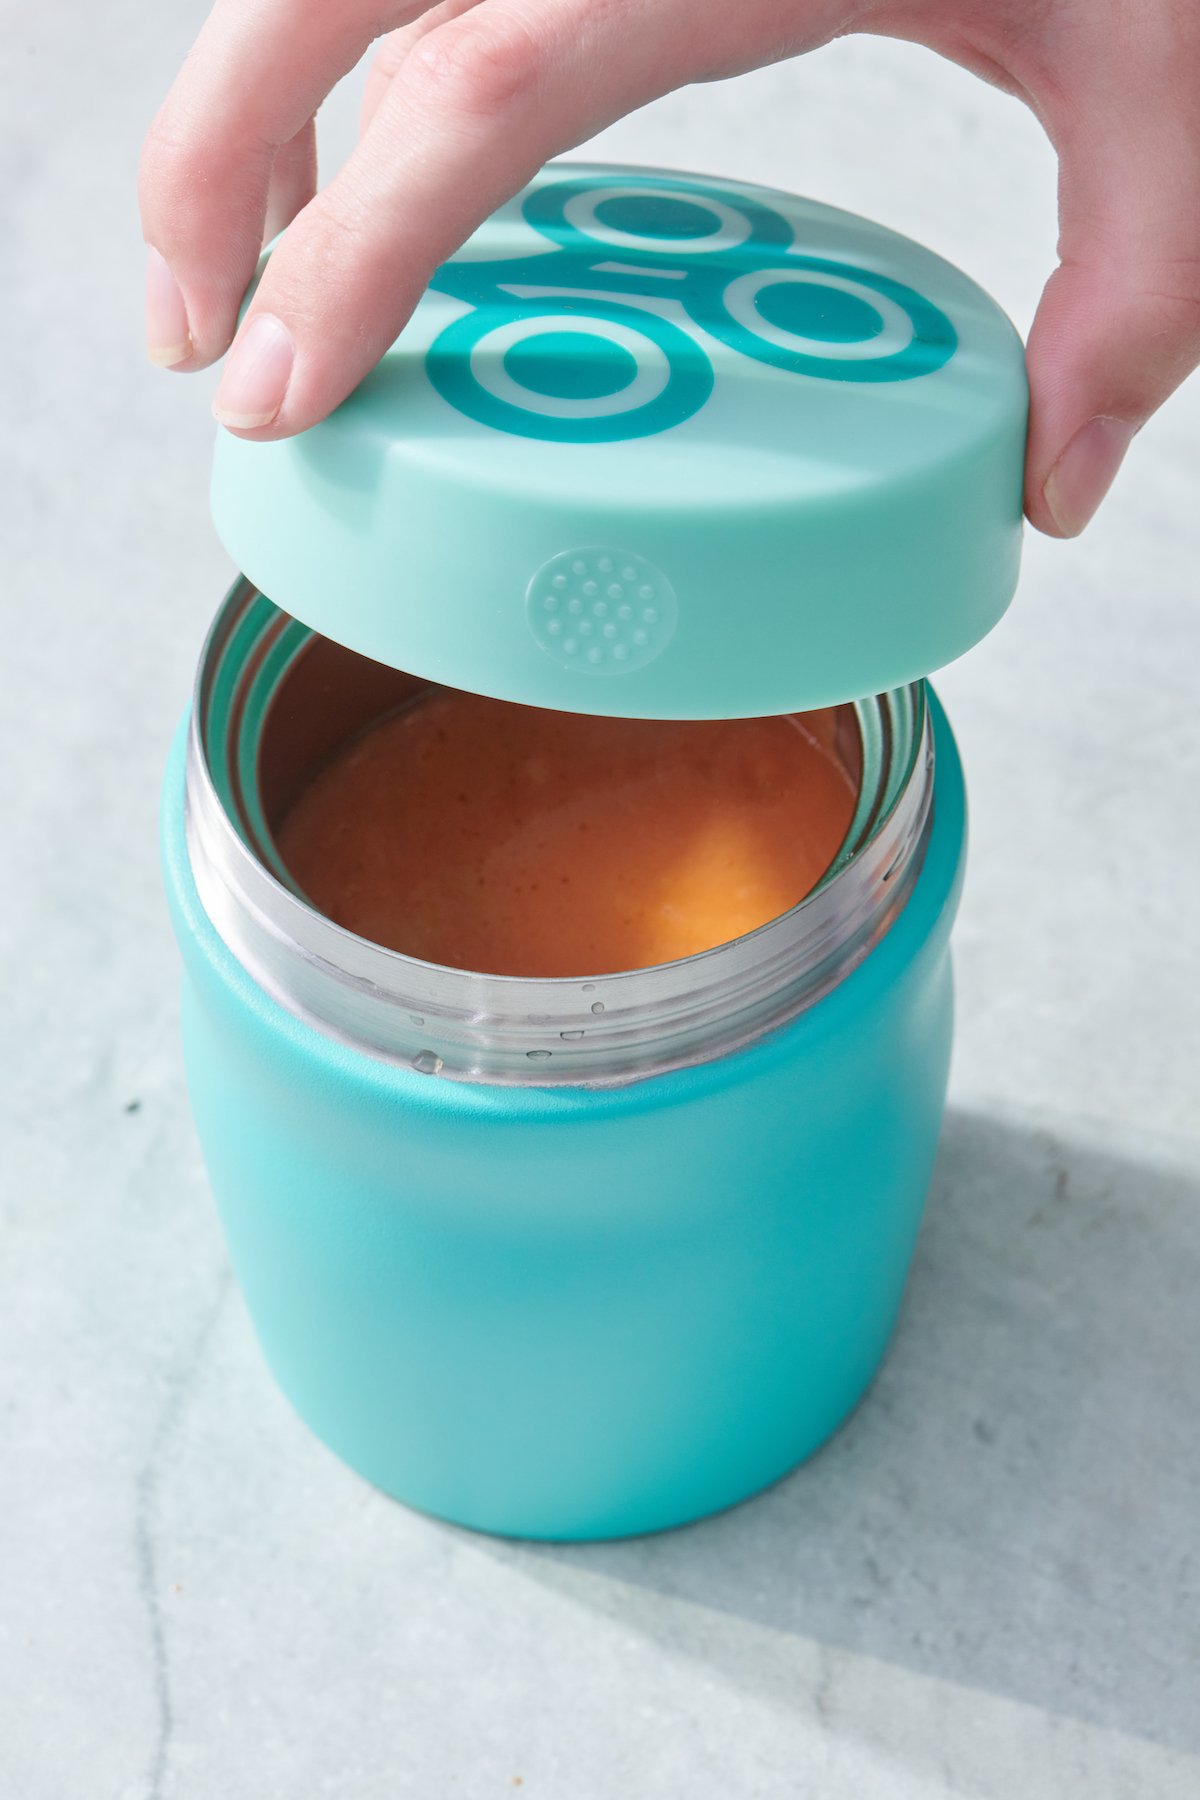 Placing the lid onto a thermos.